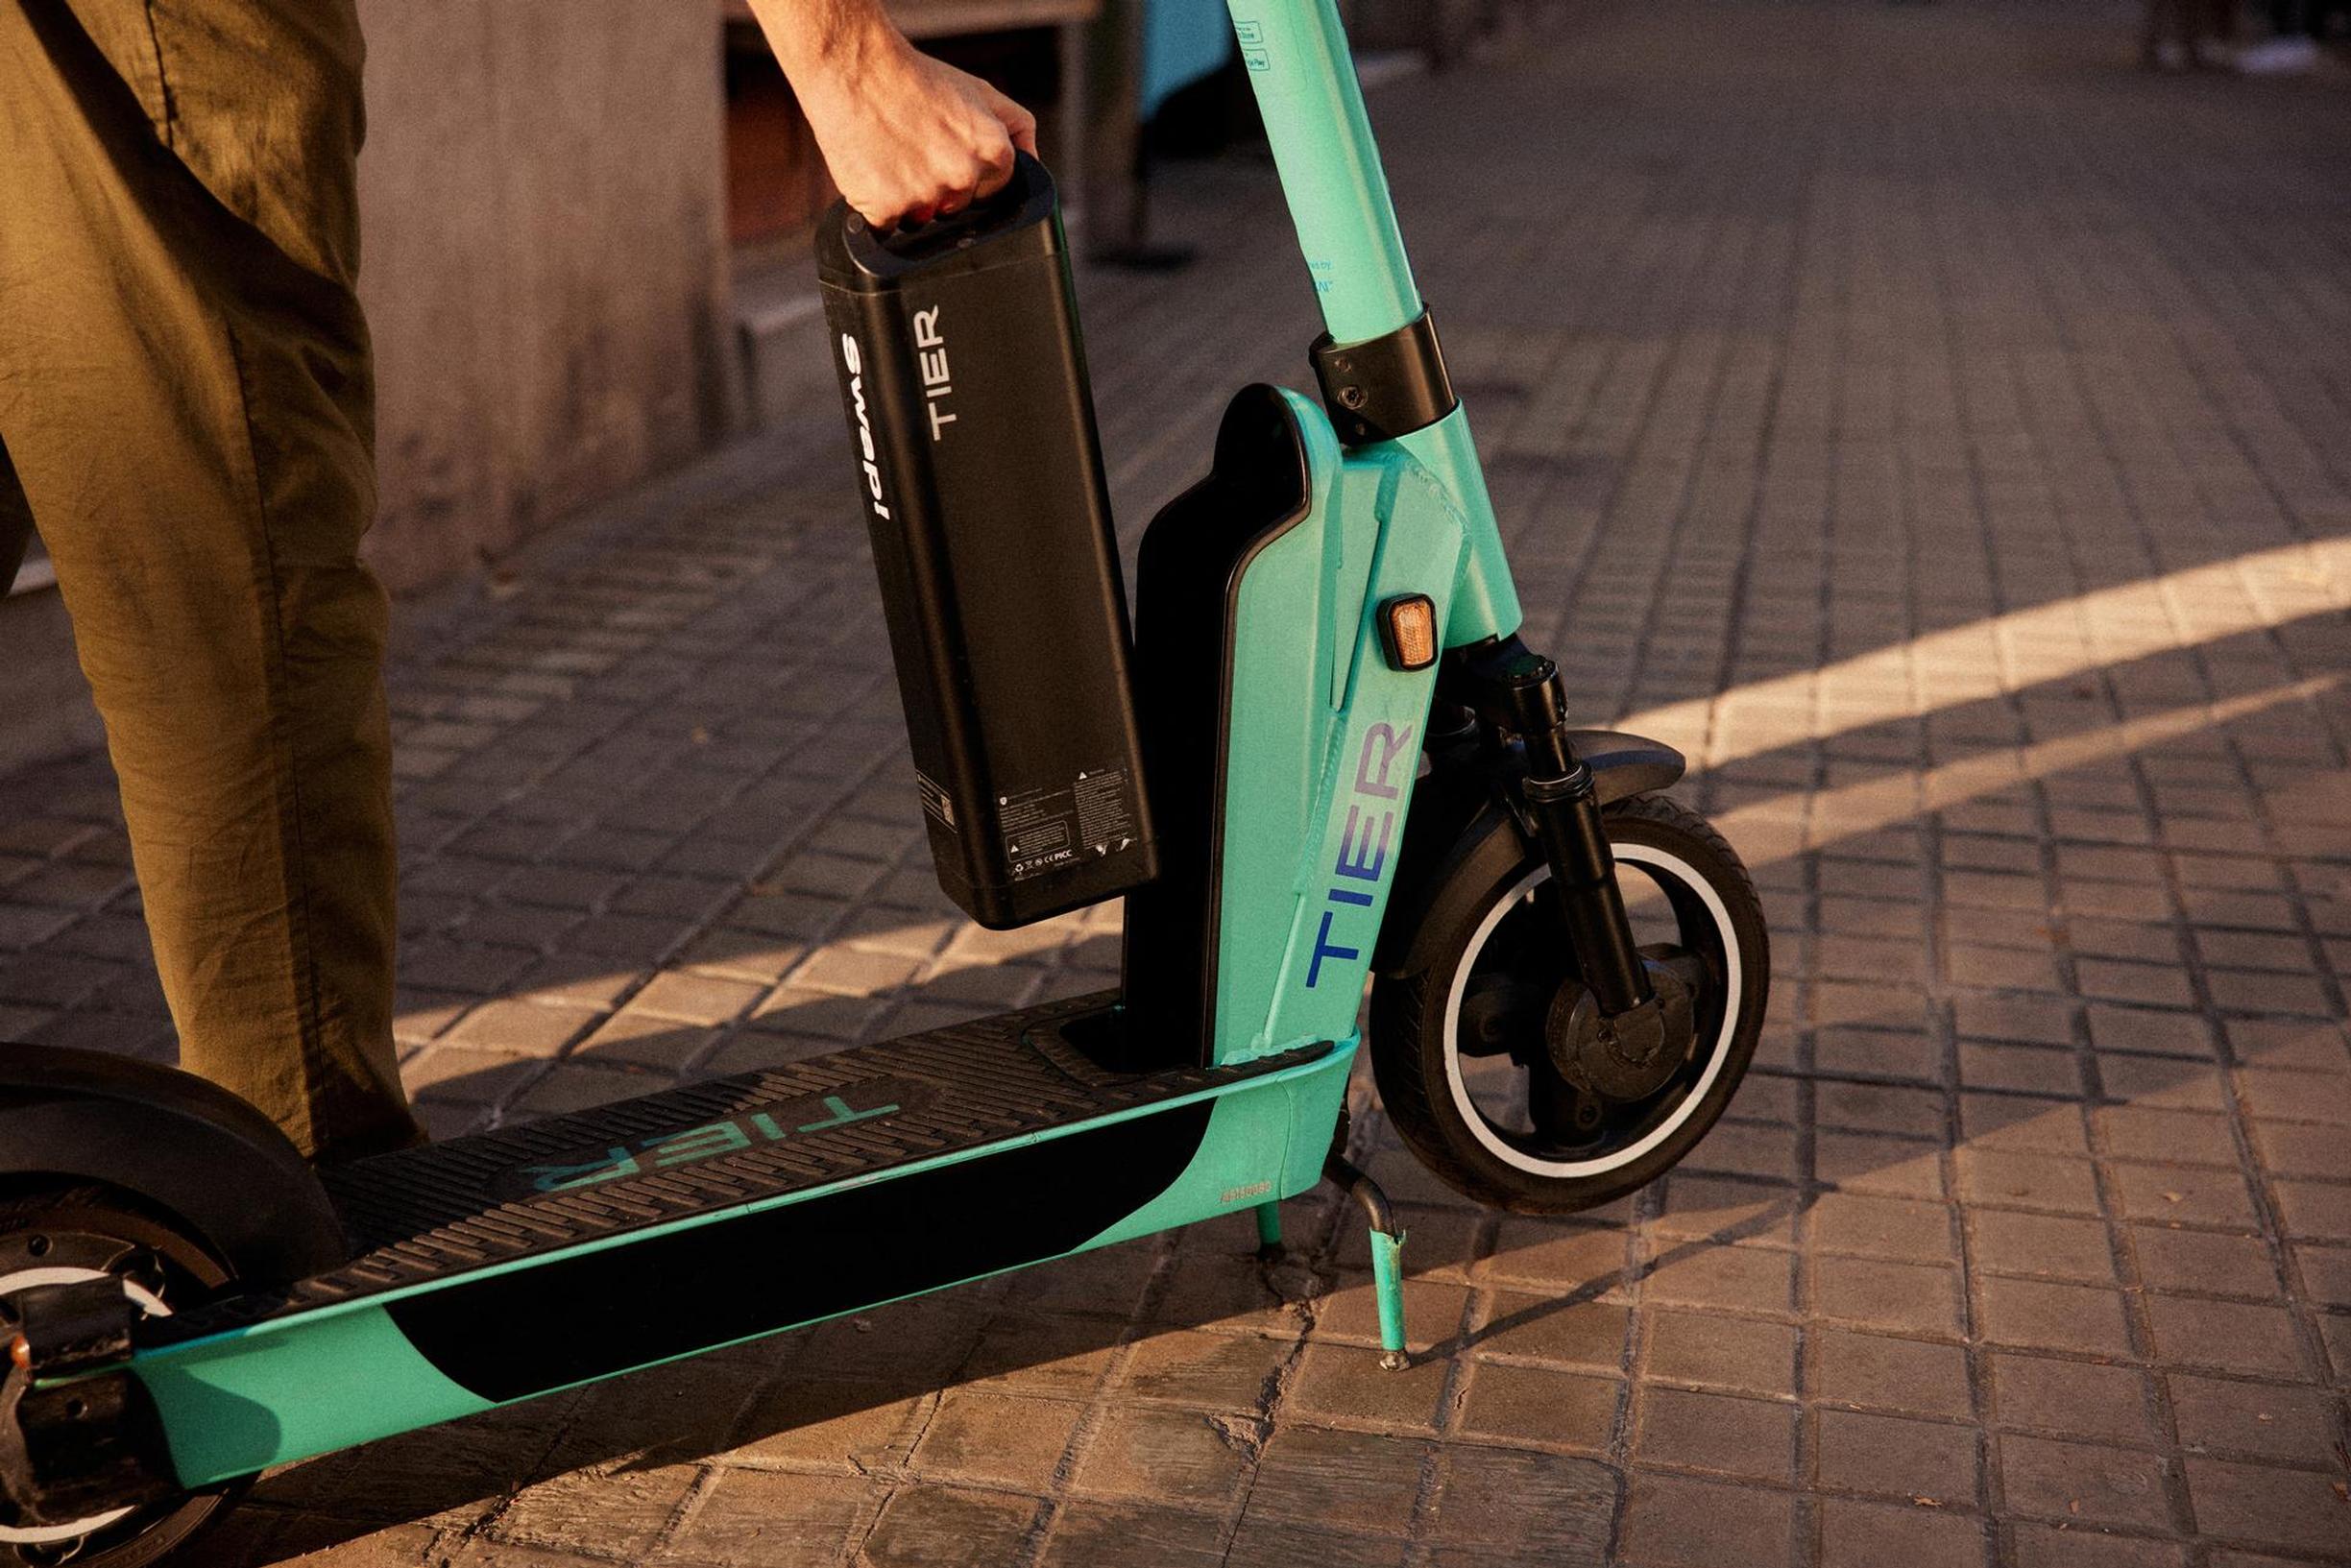 A Tier scooter battery pack